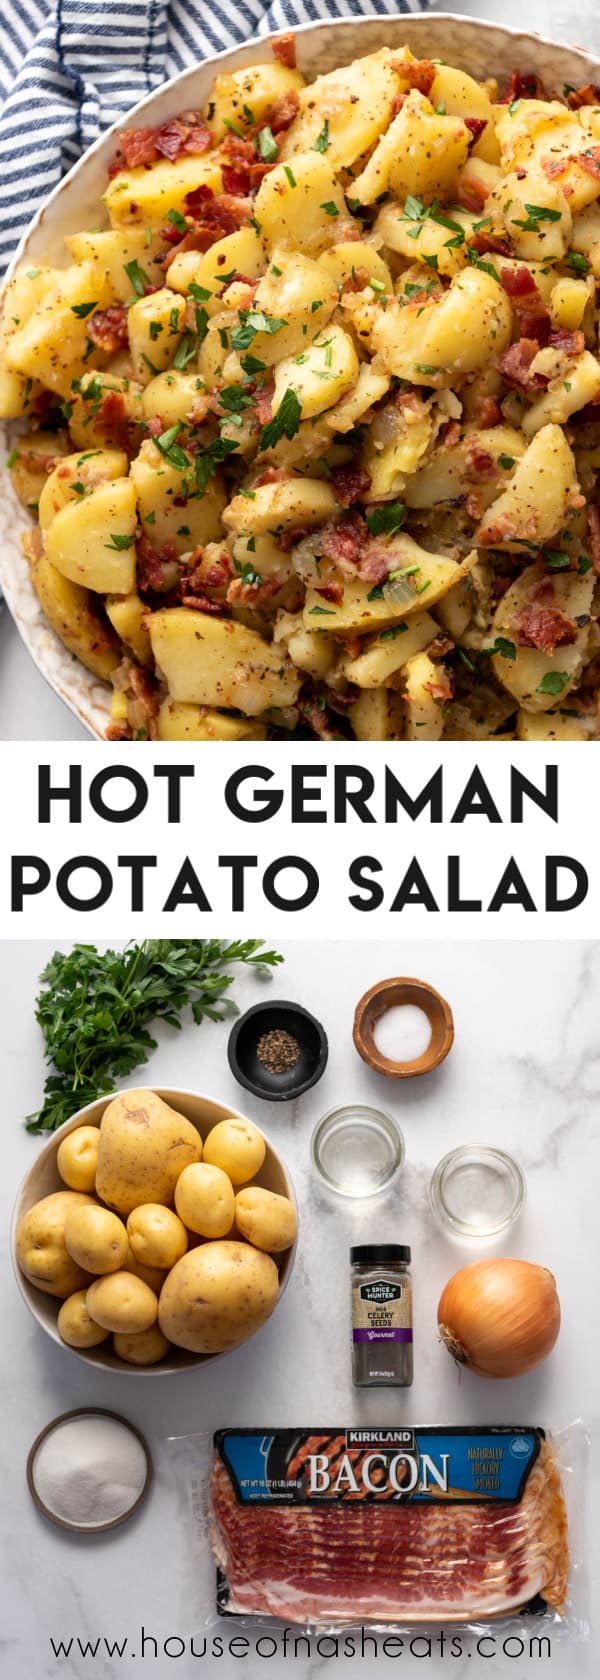 A collage of images of German potato salad with text overlay.